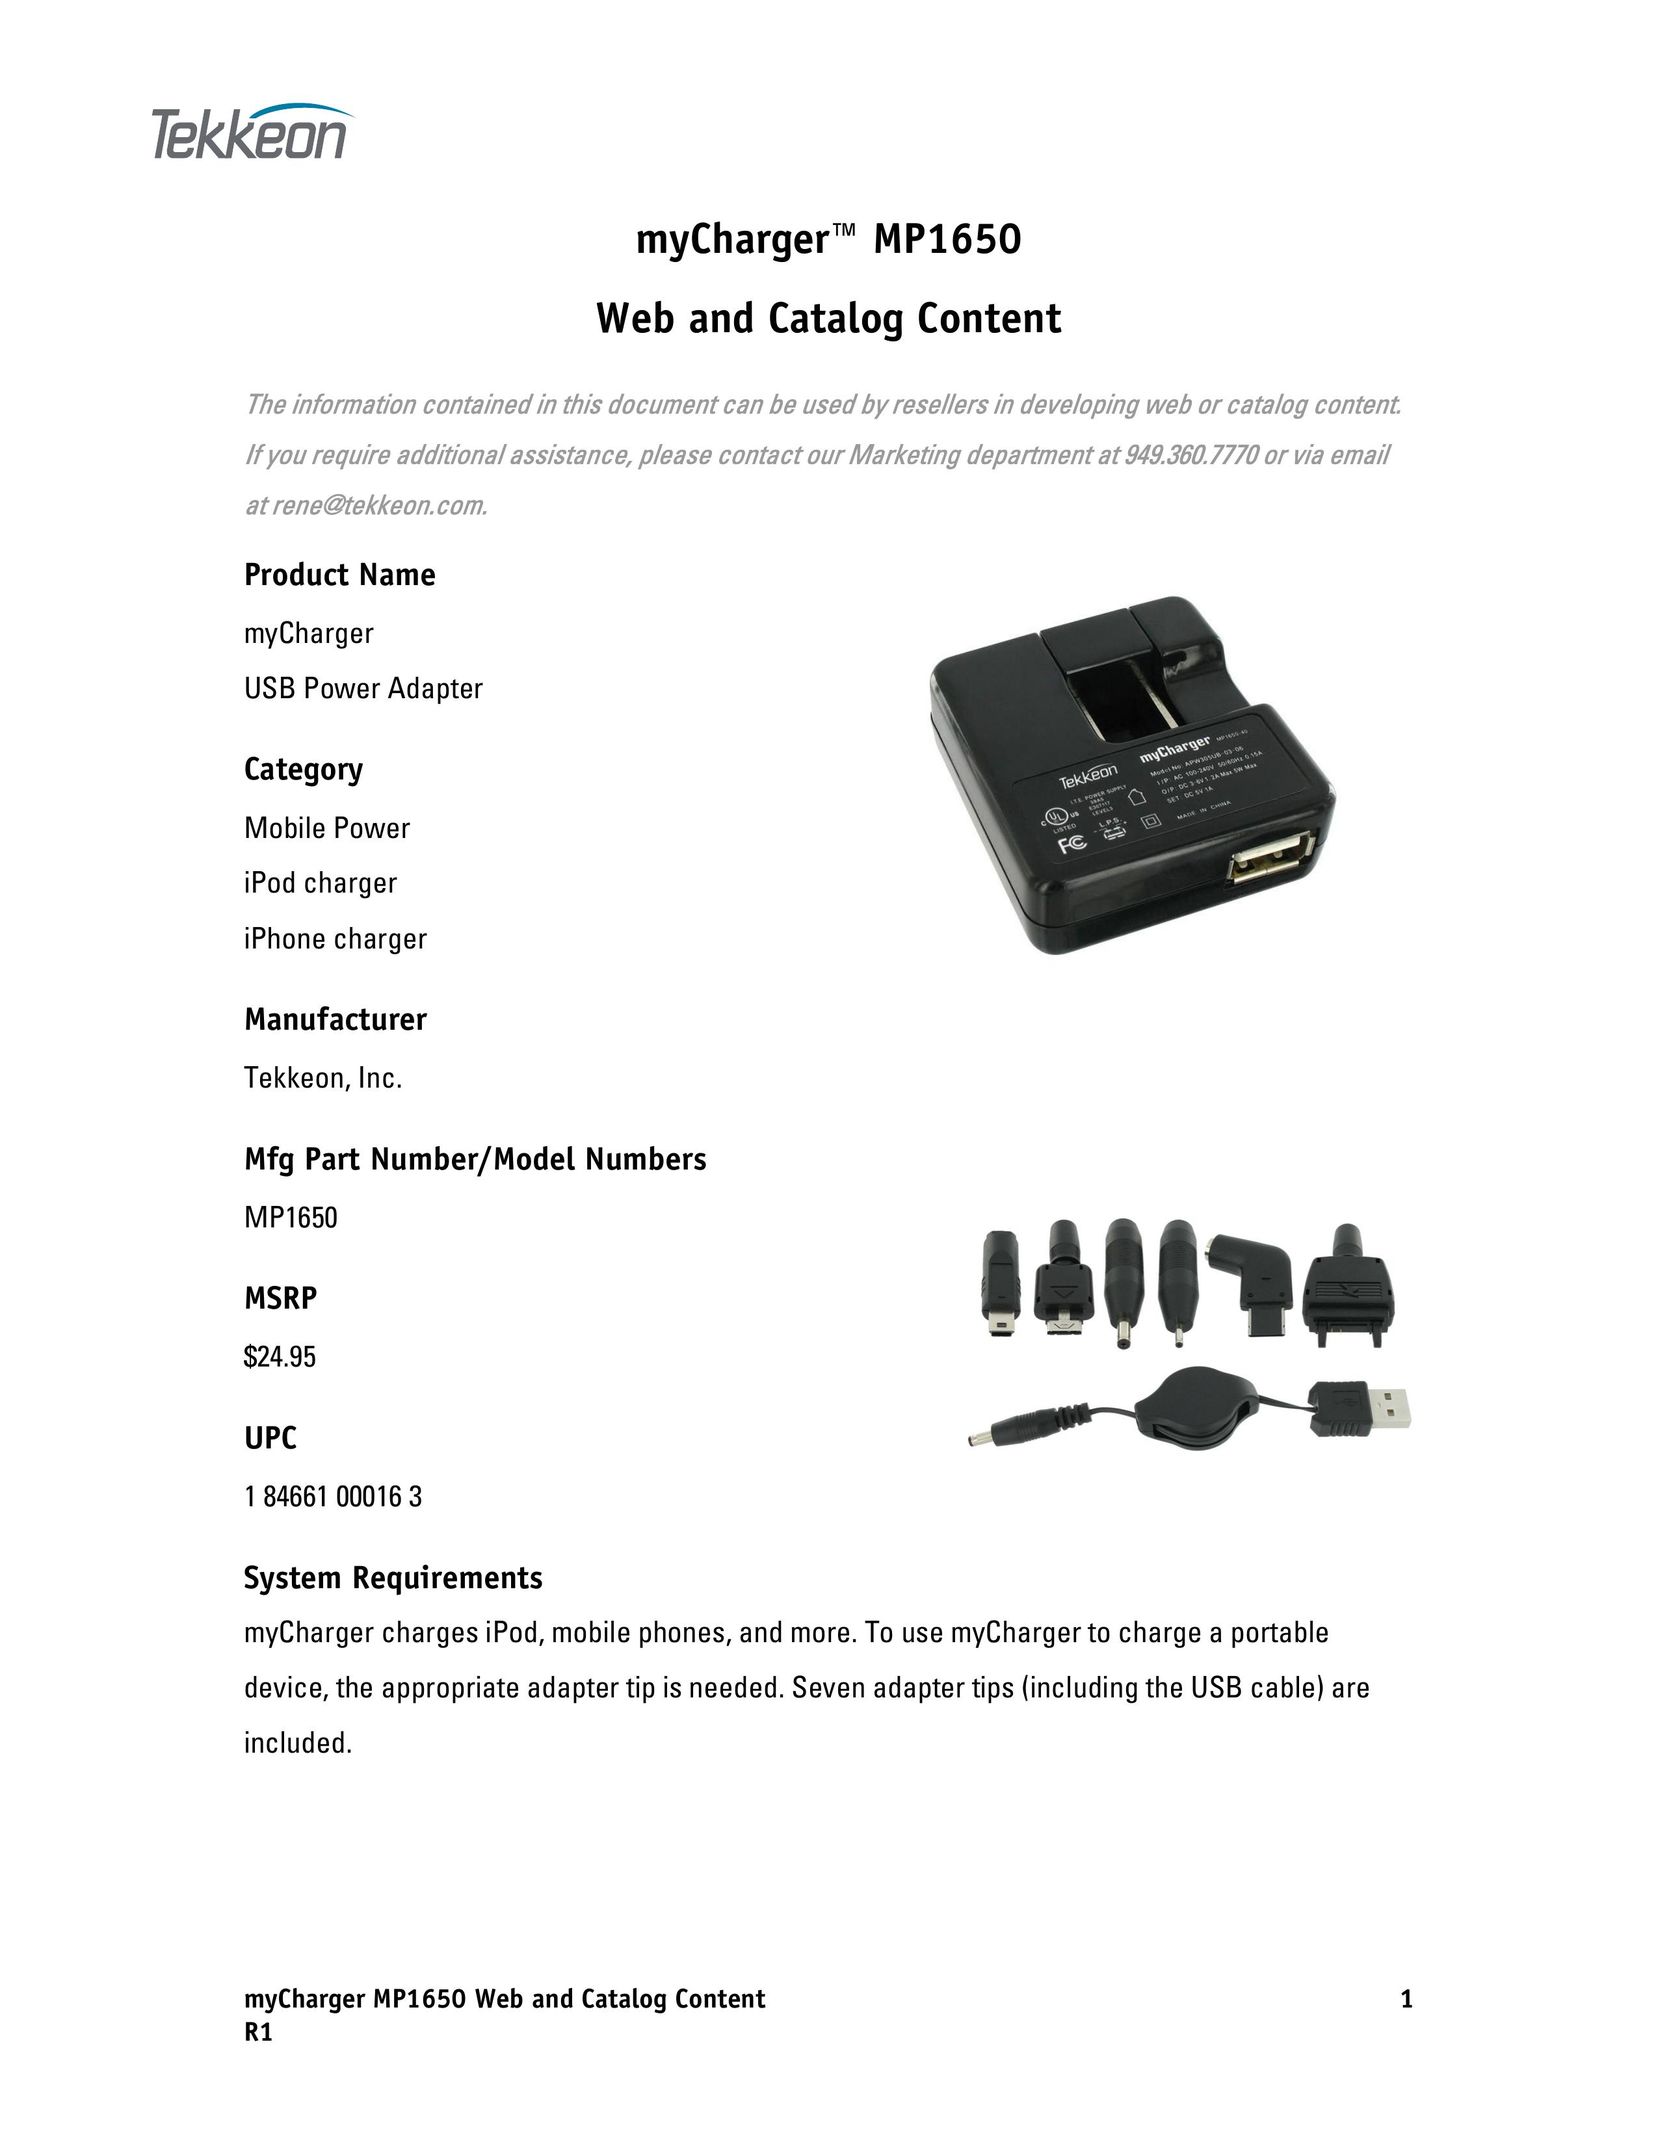 Tekkeon HX6782 Battery Charger User Manual